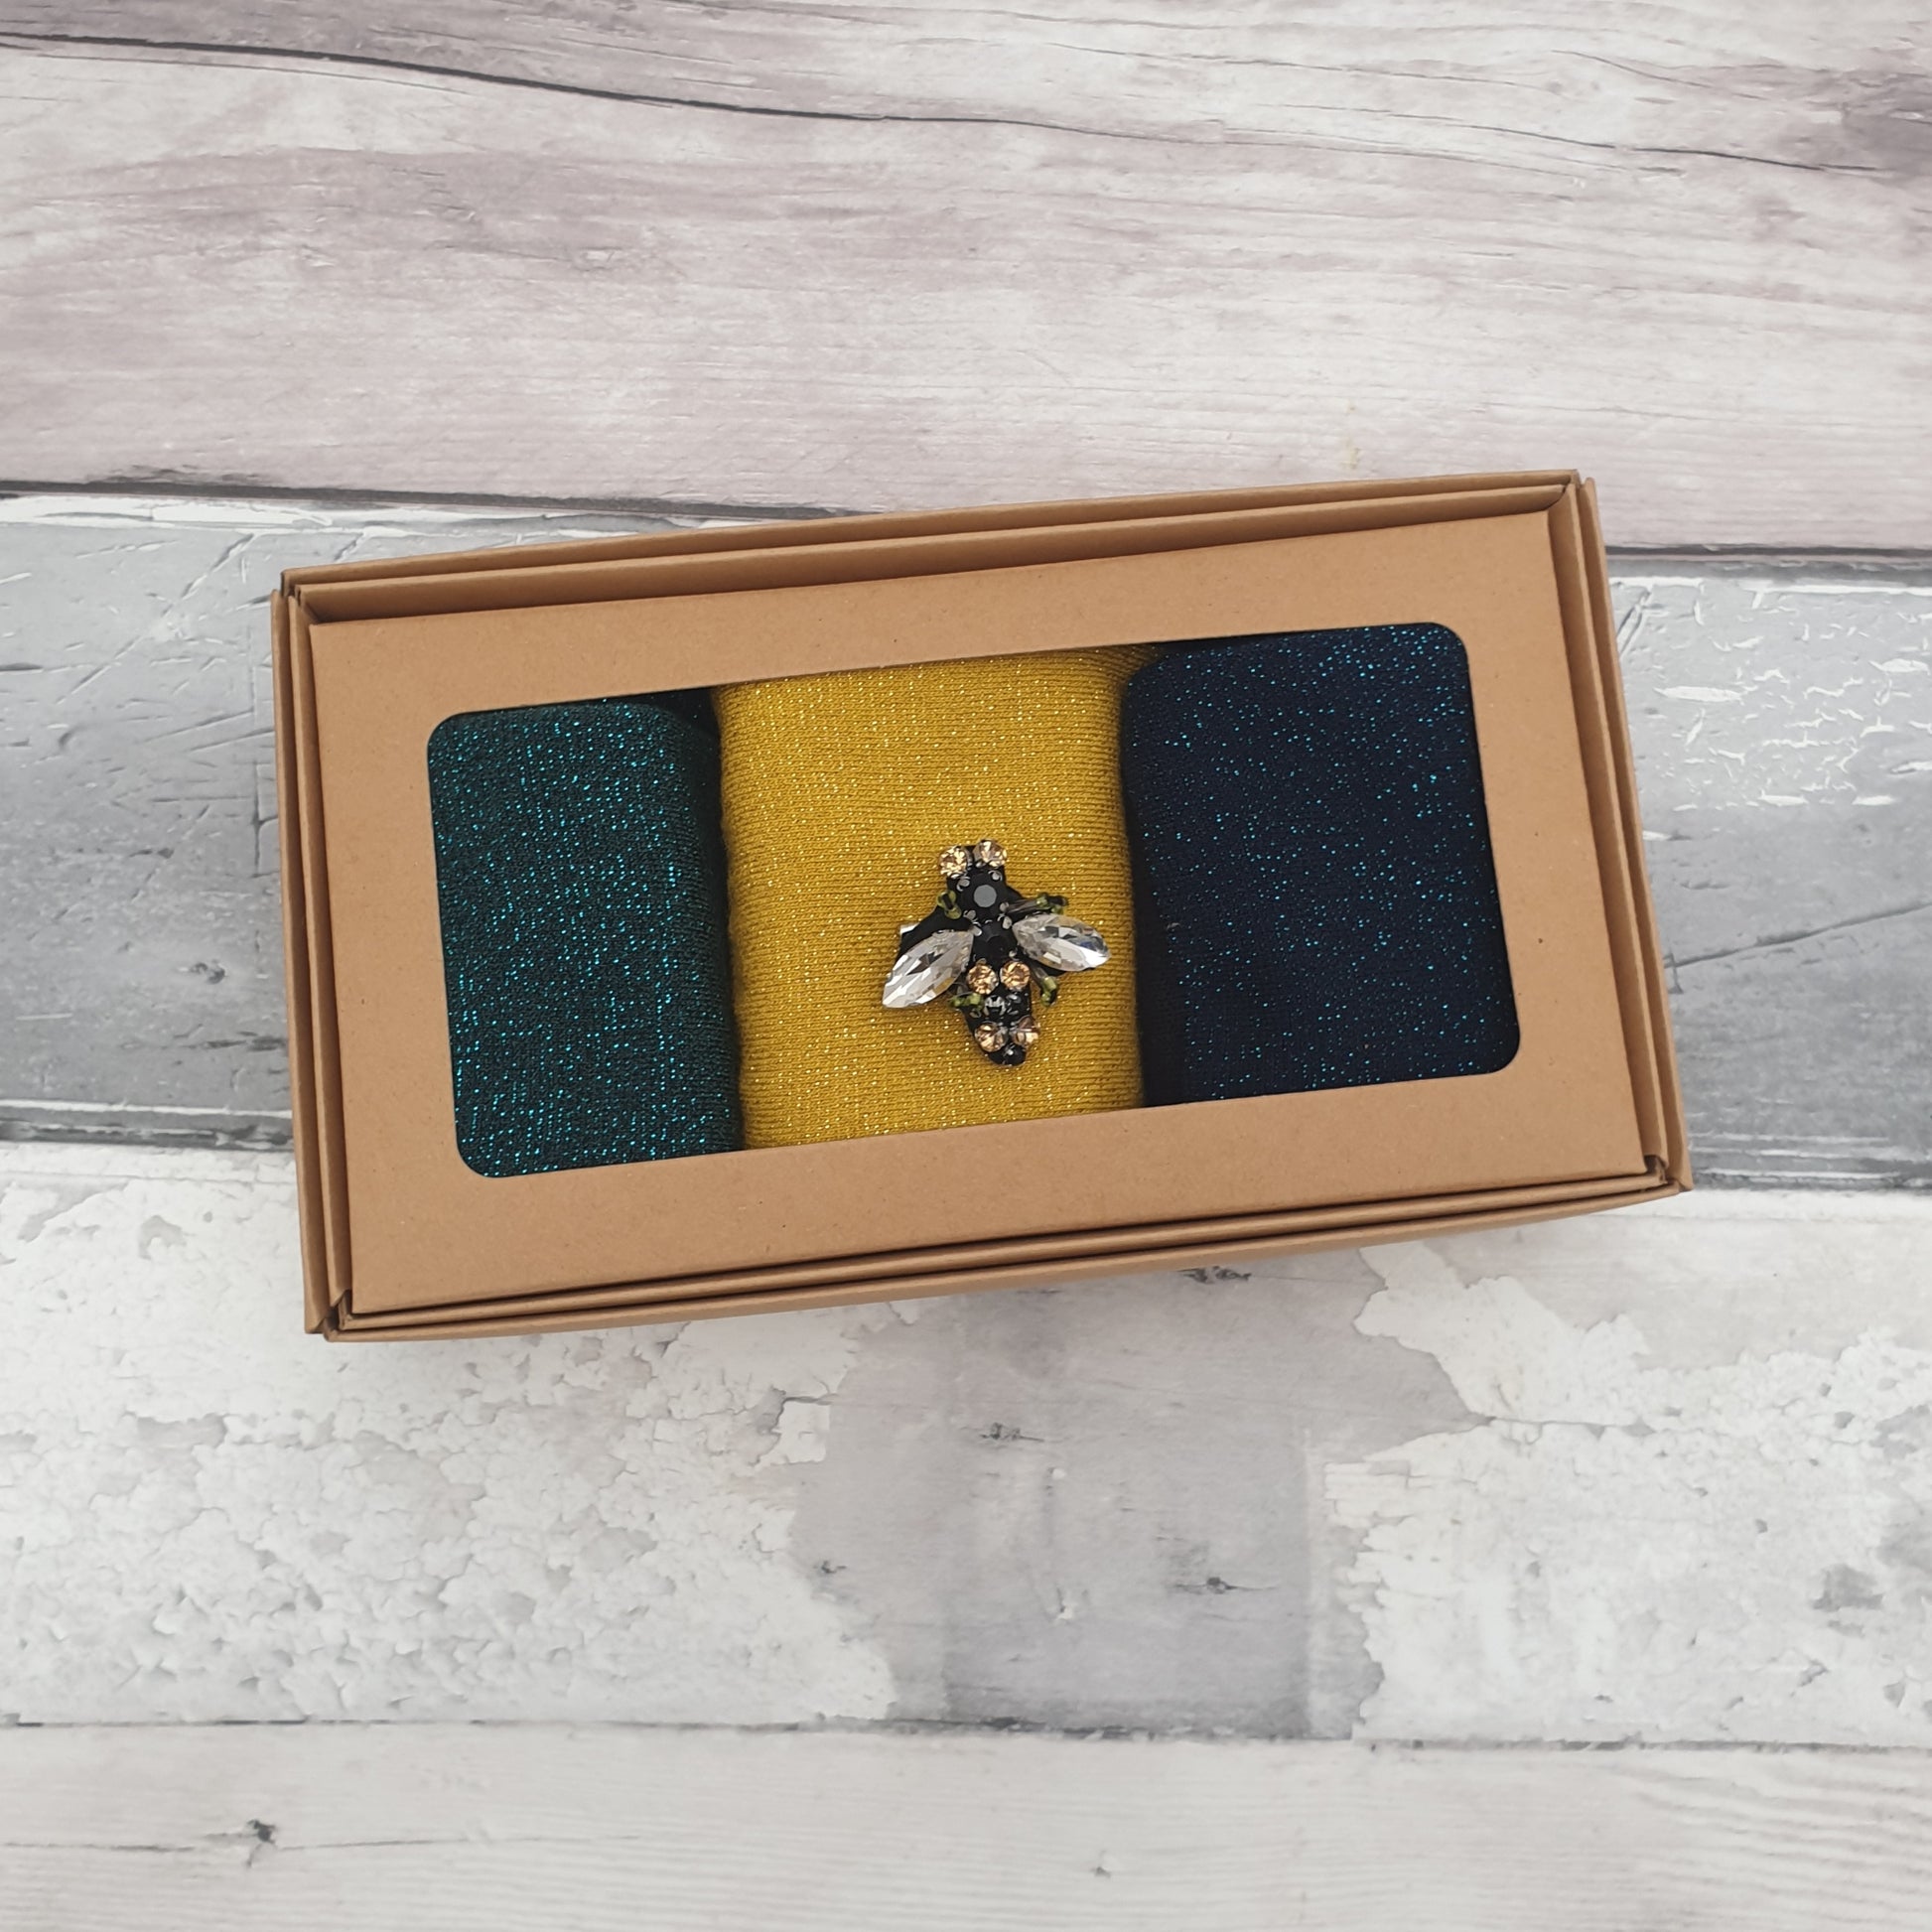 Gift box, comprising 3 pairs of sparkling socks and a bee brooch made from recycled glass.